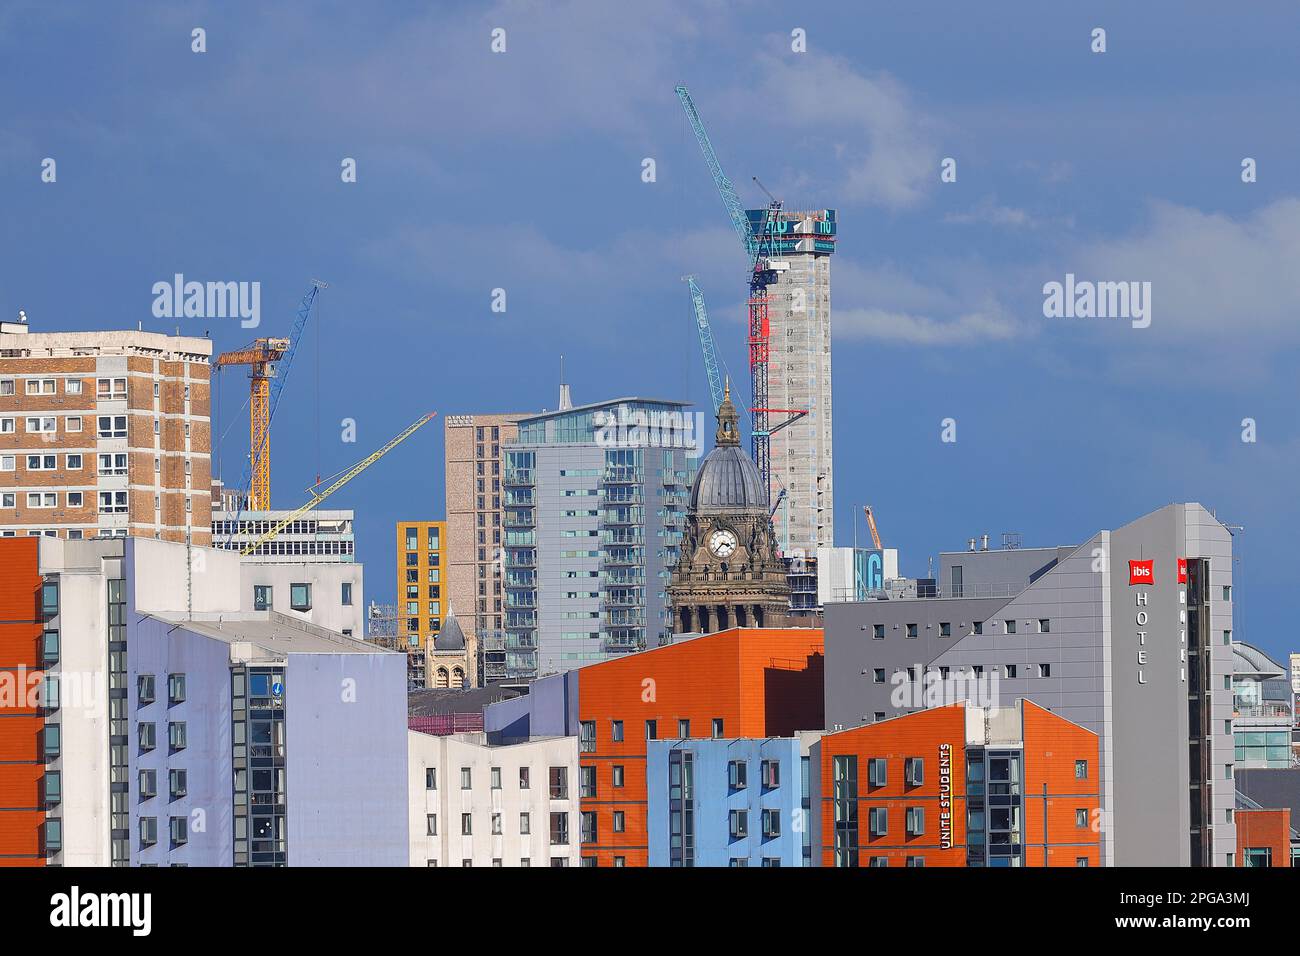 Leeds Town Hall clock tower pictured next to a 31 storey building under construction in Leeds city centre Stock Photo